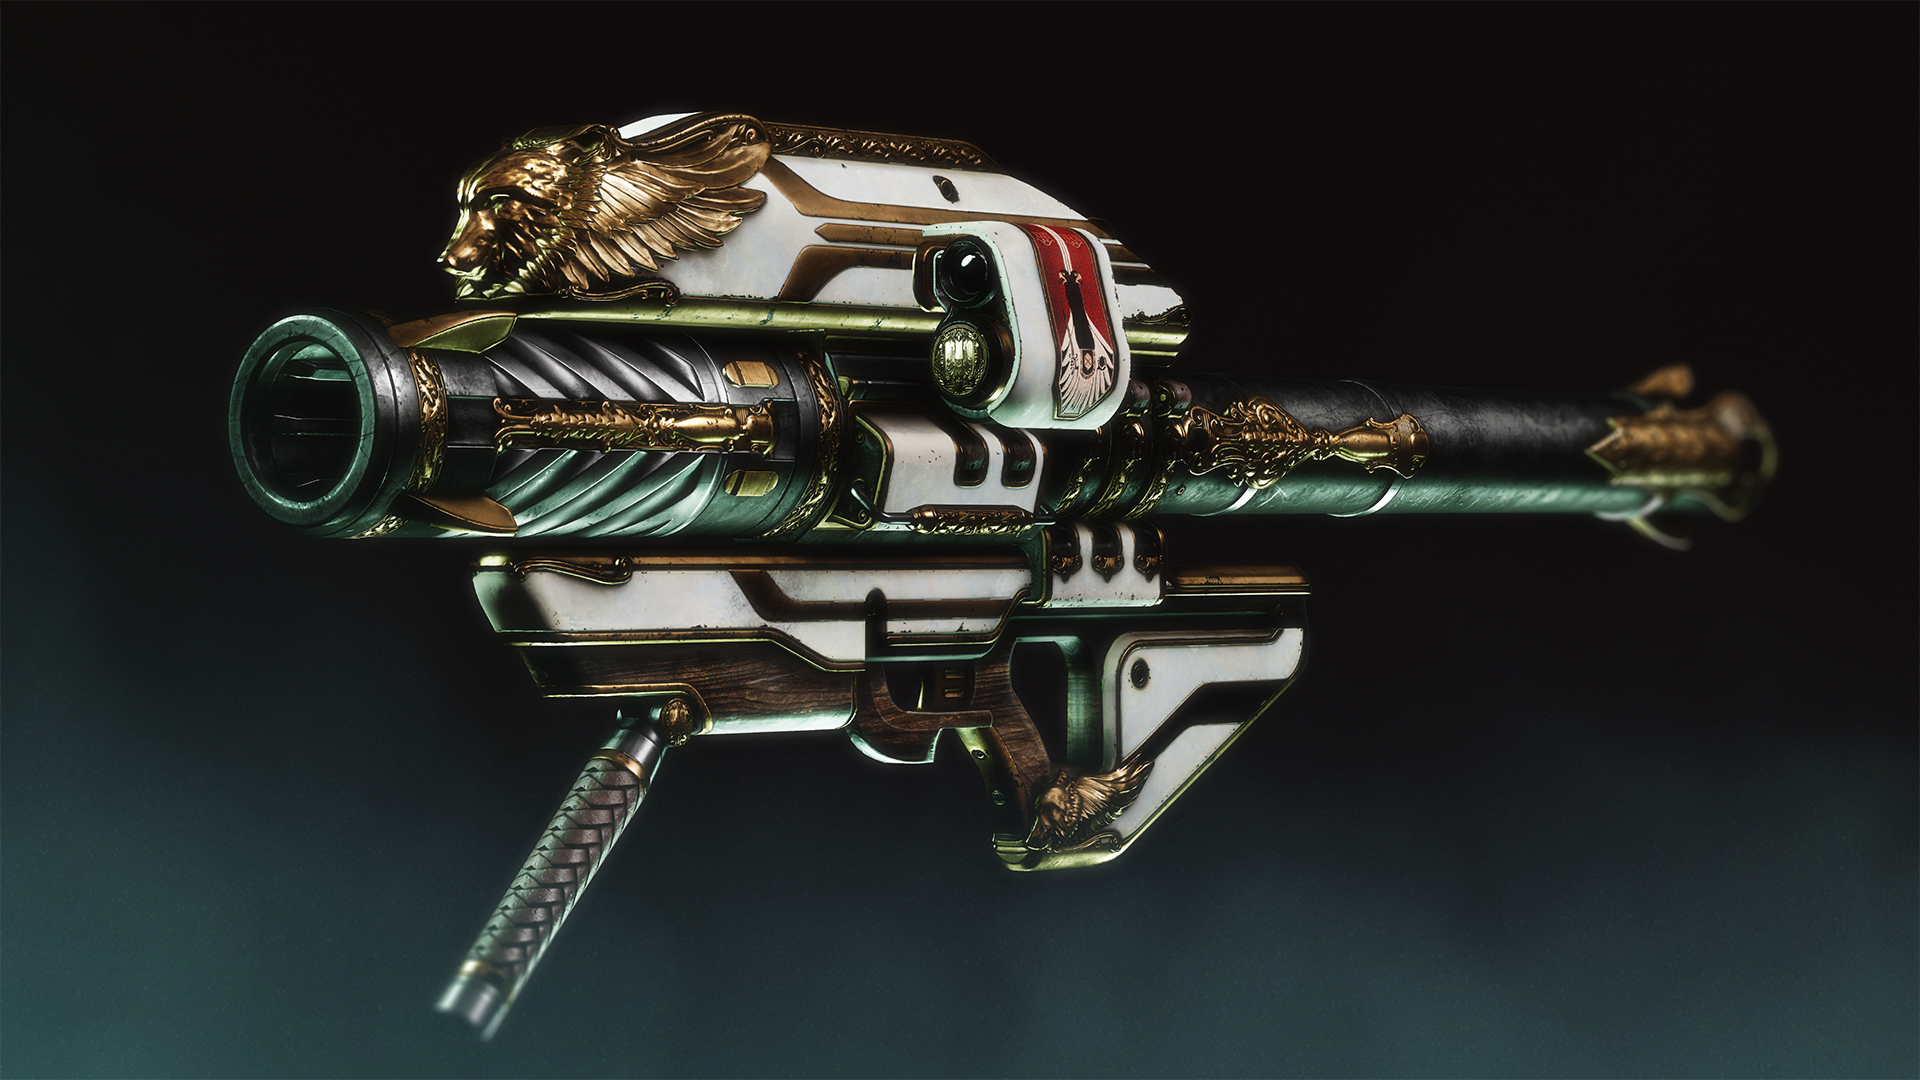 The Gjallarhorn rocket launcher shown on a black background as part of a promotional image.